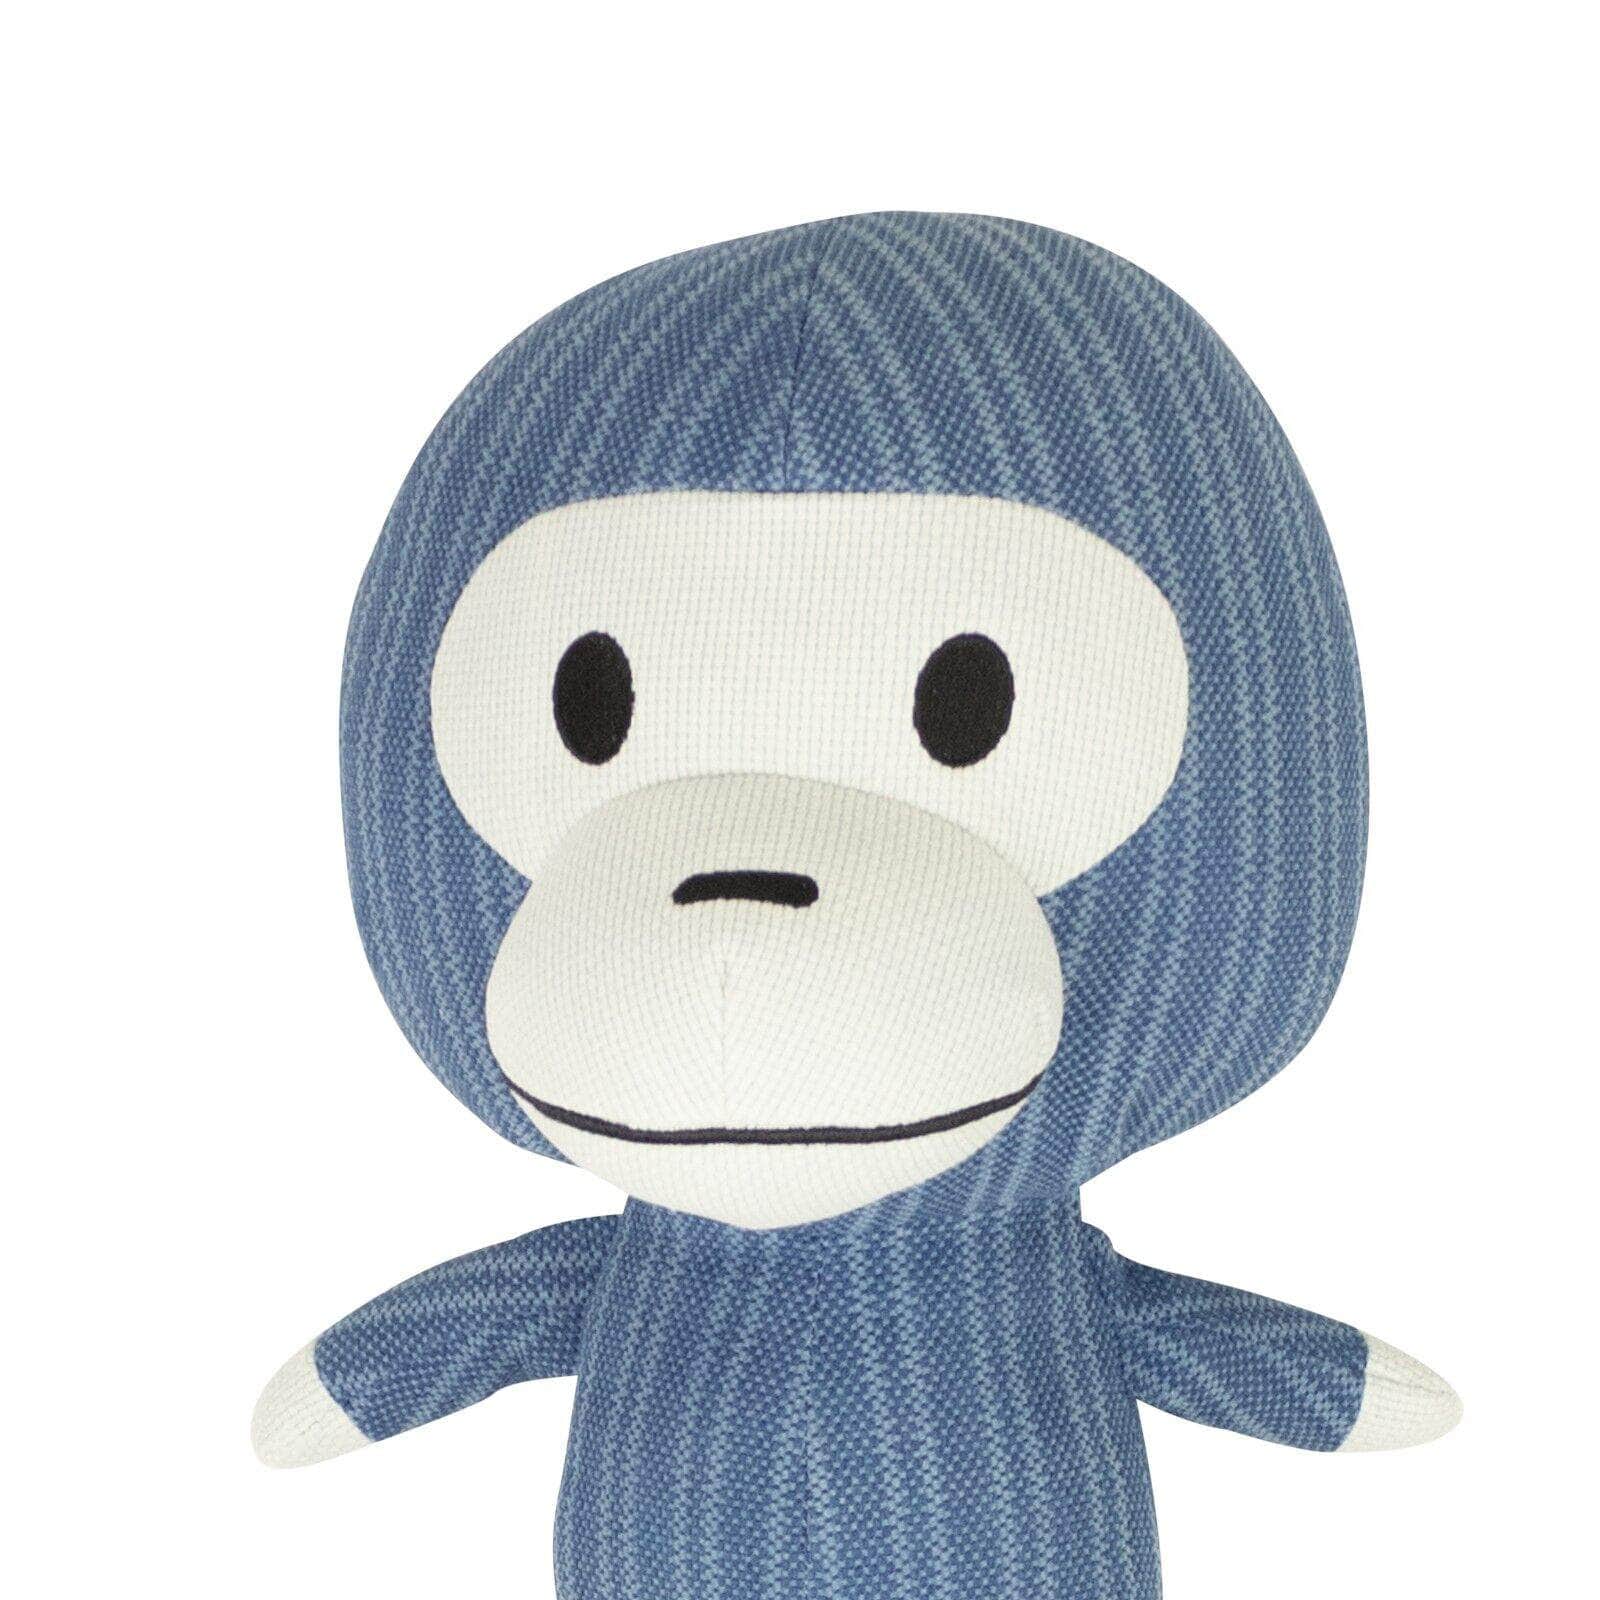 Bape bape, channelenable-all, chicmi, couponcollection, gender-mens, gender-womens, main-accessories, mens-shoes, shop375, size-os, stationary-toys, under-250 OS Navy Blue Cotton Big Baby Milo Plush Doll BAP-XACC-0024/OS BAP-XACC-0024/OS